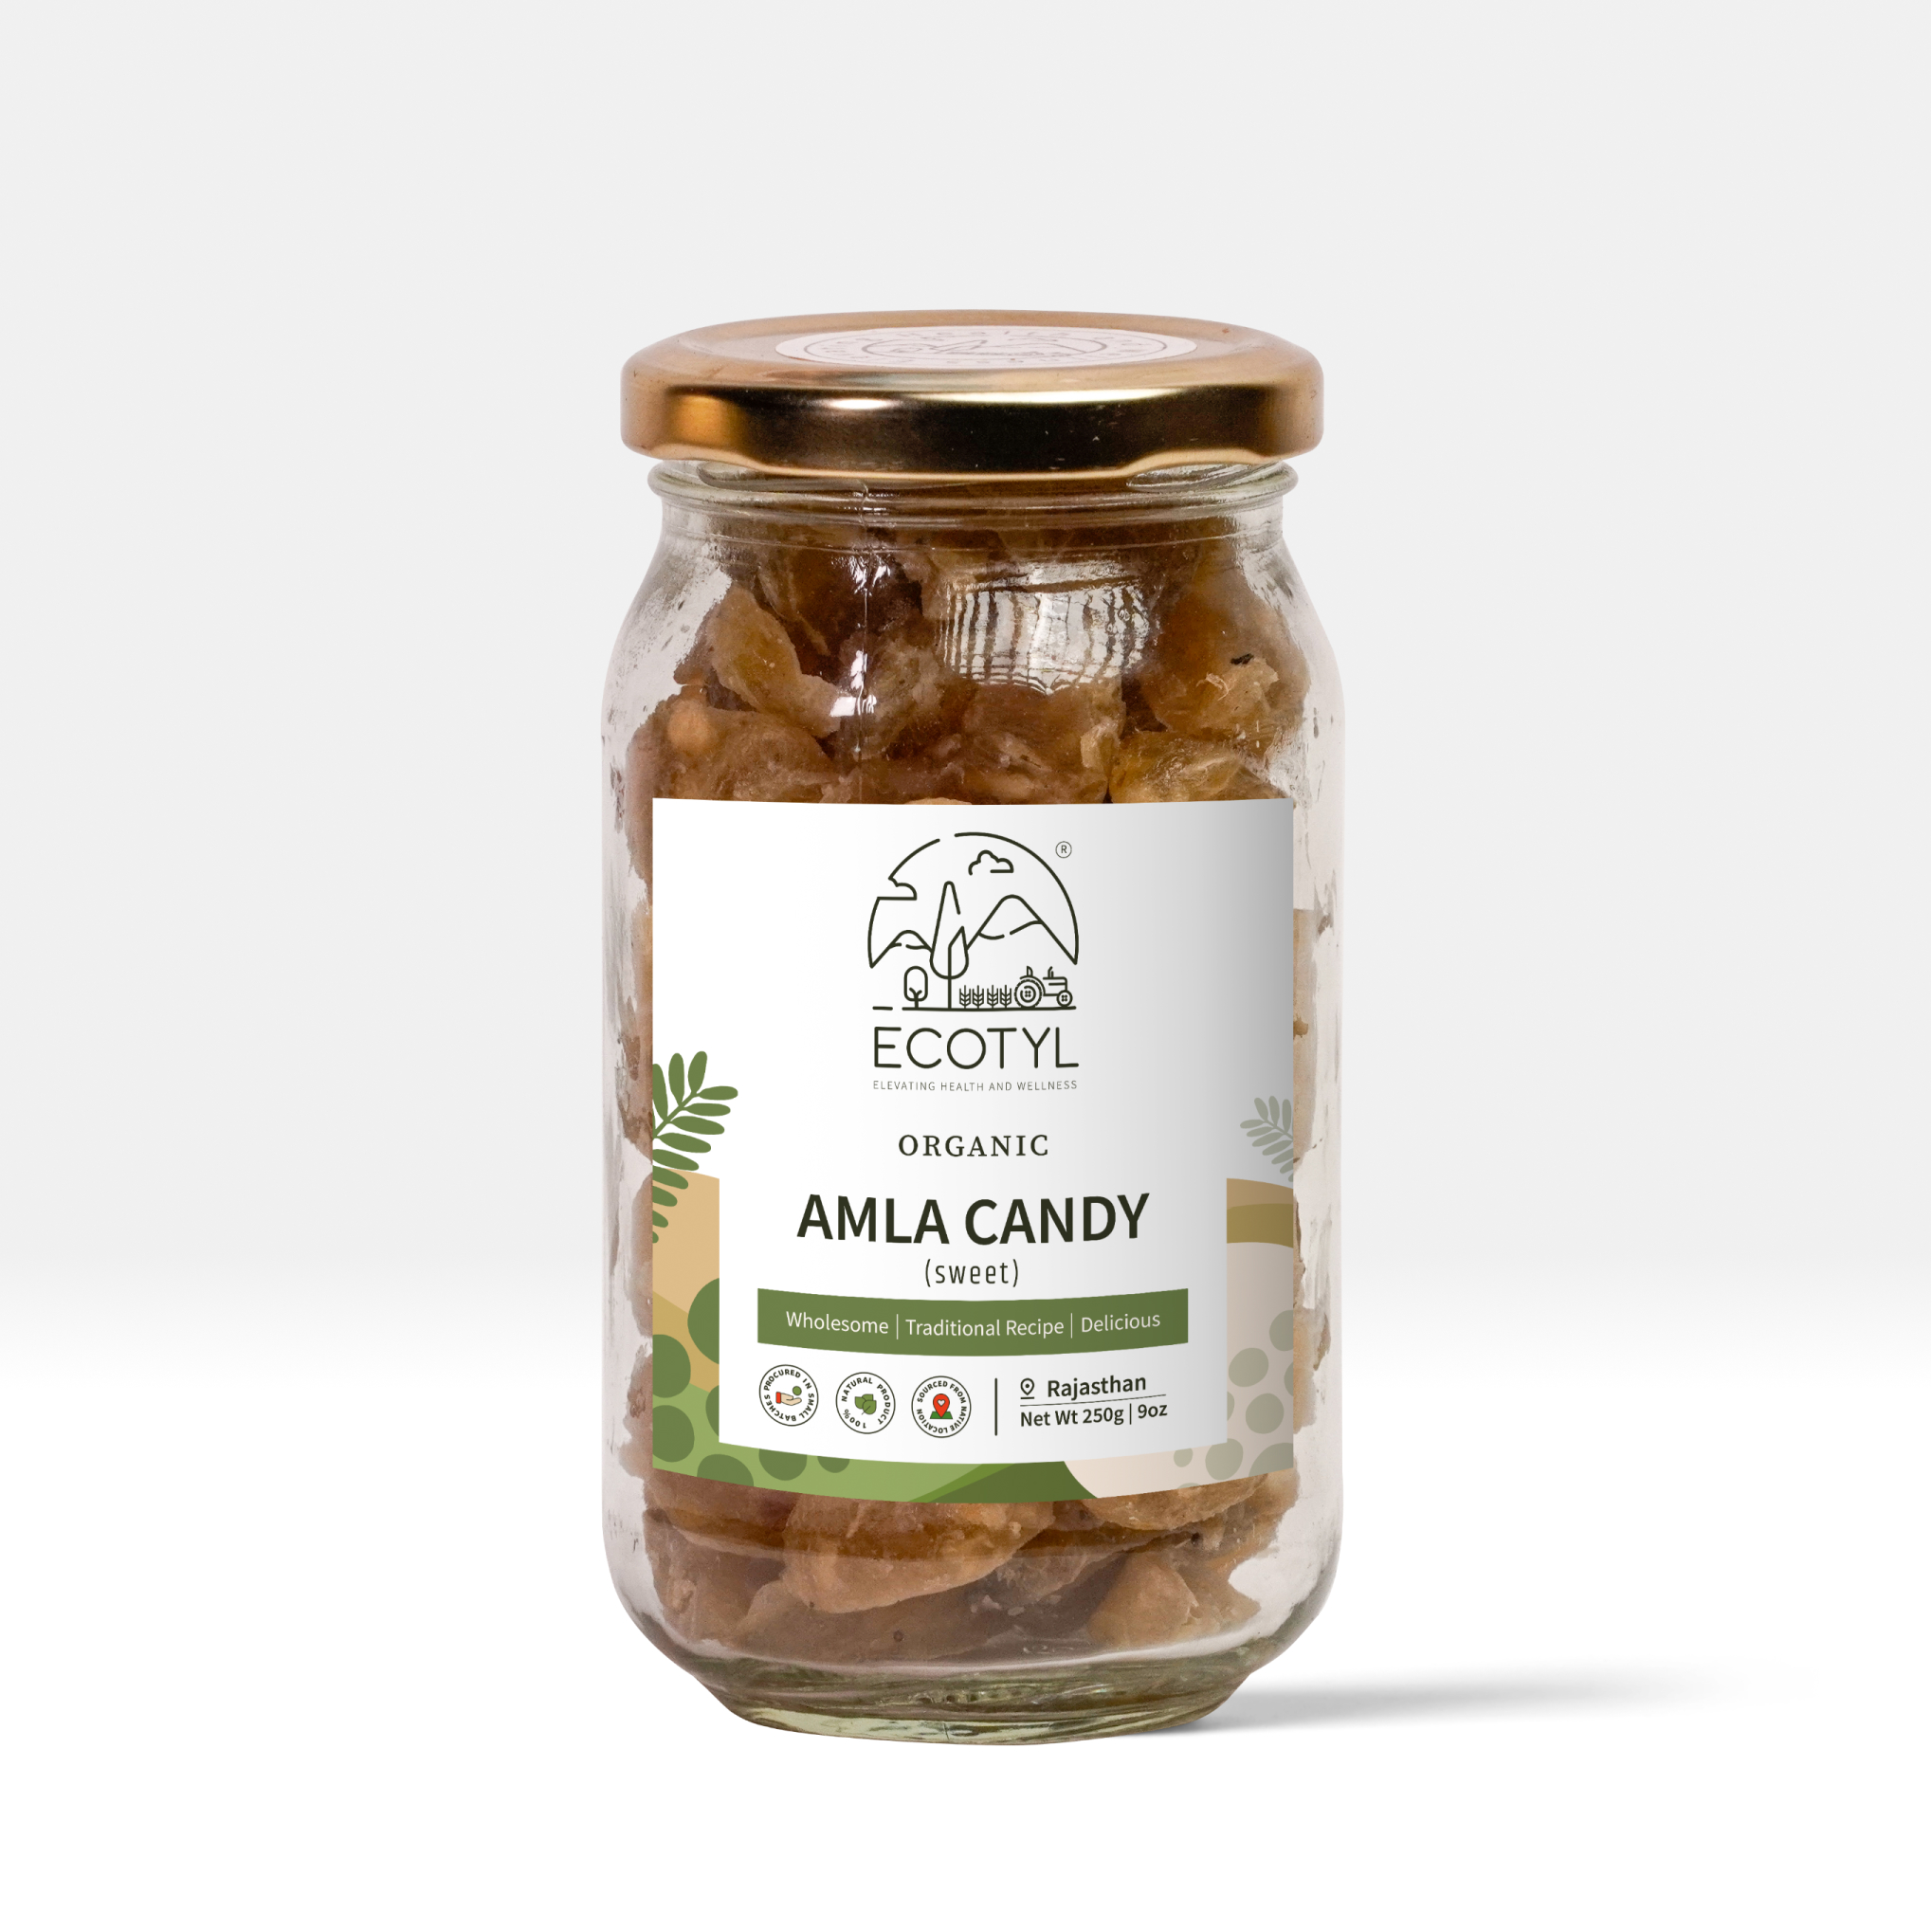 Buy Ecotyl Organic Amla Candy (Sweet) - 250g at Best Price Online